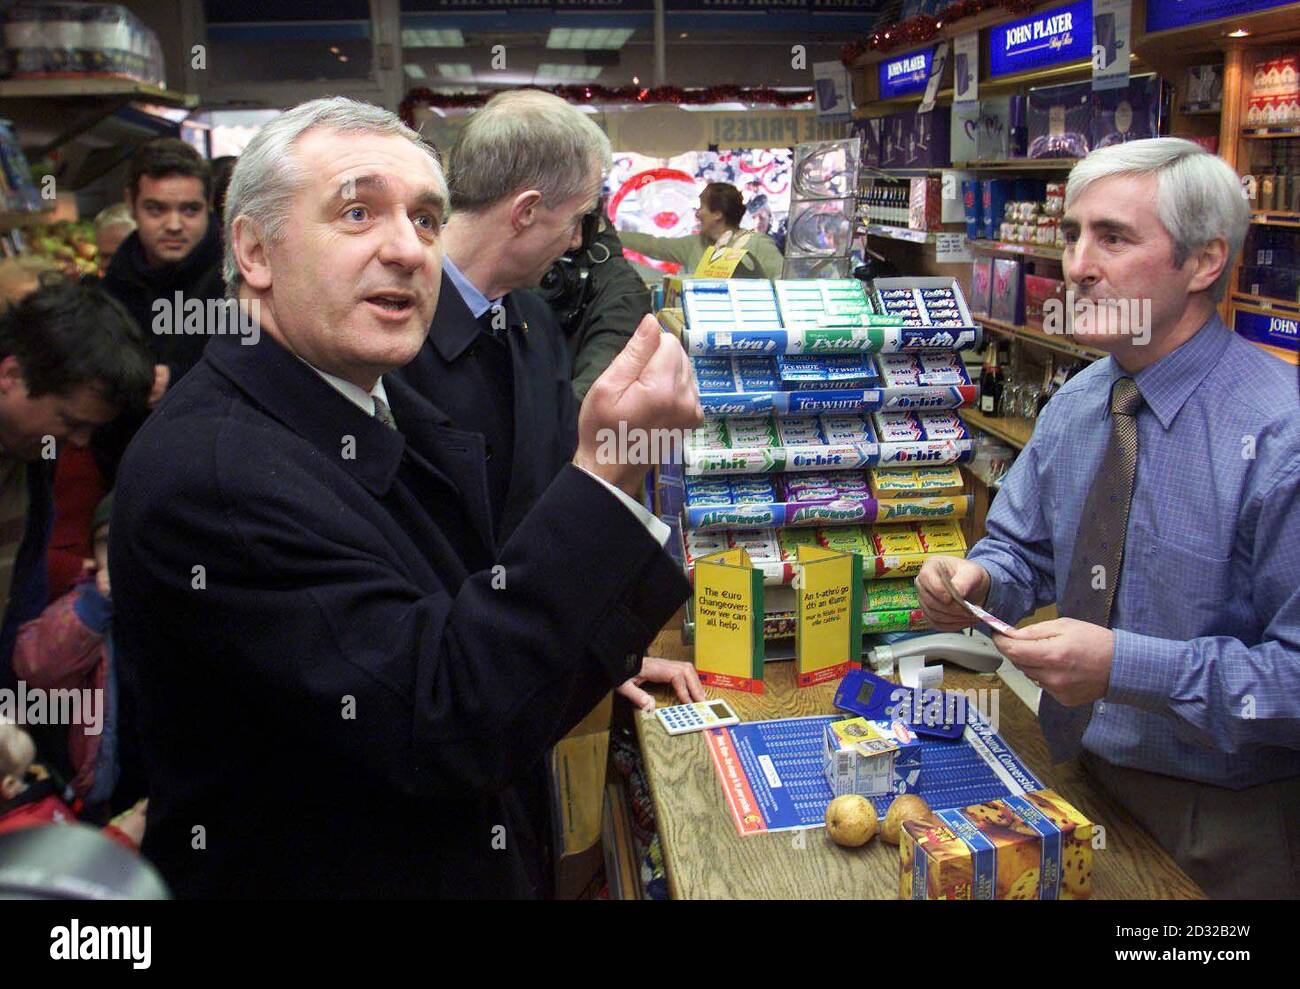 Irish Prime Minister Bertie Ahern makes a purchase from Jim O'Neill, proprietors of O'Neill's the local newsagents, with the new Euro currency. Queues formed outside the Irish Central Bank in Dublin to receive supplies of Euro notes.   * Notes only became officially available from midnight, and although Irish businesses were handed reserves in advance, members of the public had to wait until the first cash machines opened at around 6am after being re-programmed and having their punts stocks replaced with Euros. Stock Photo